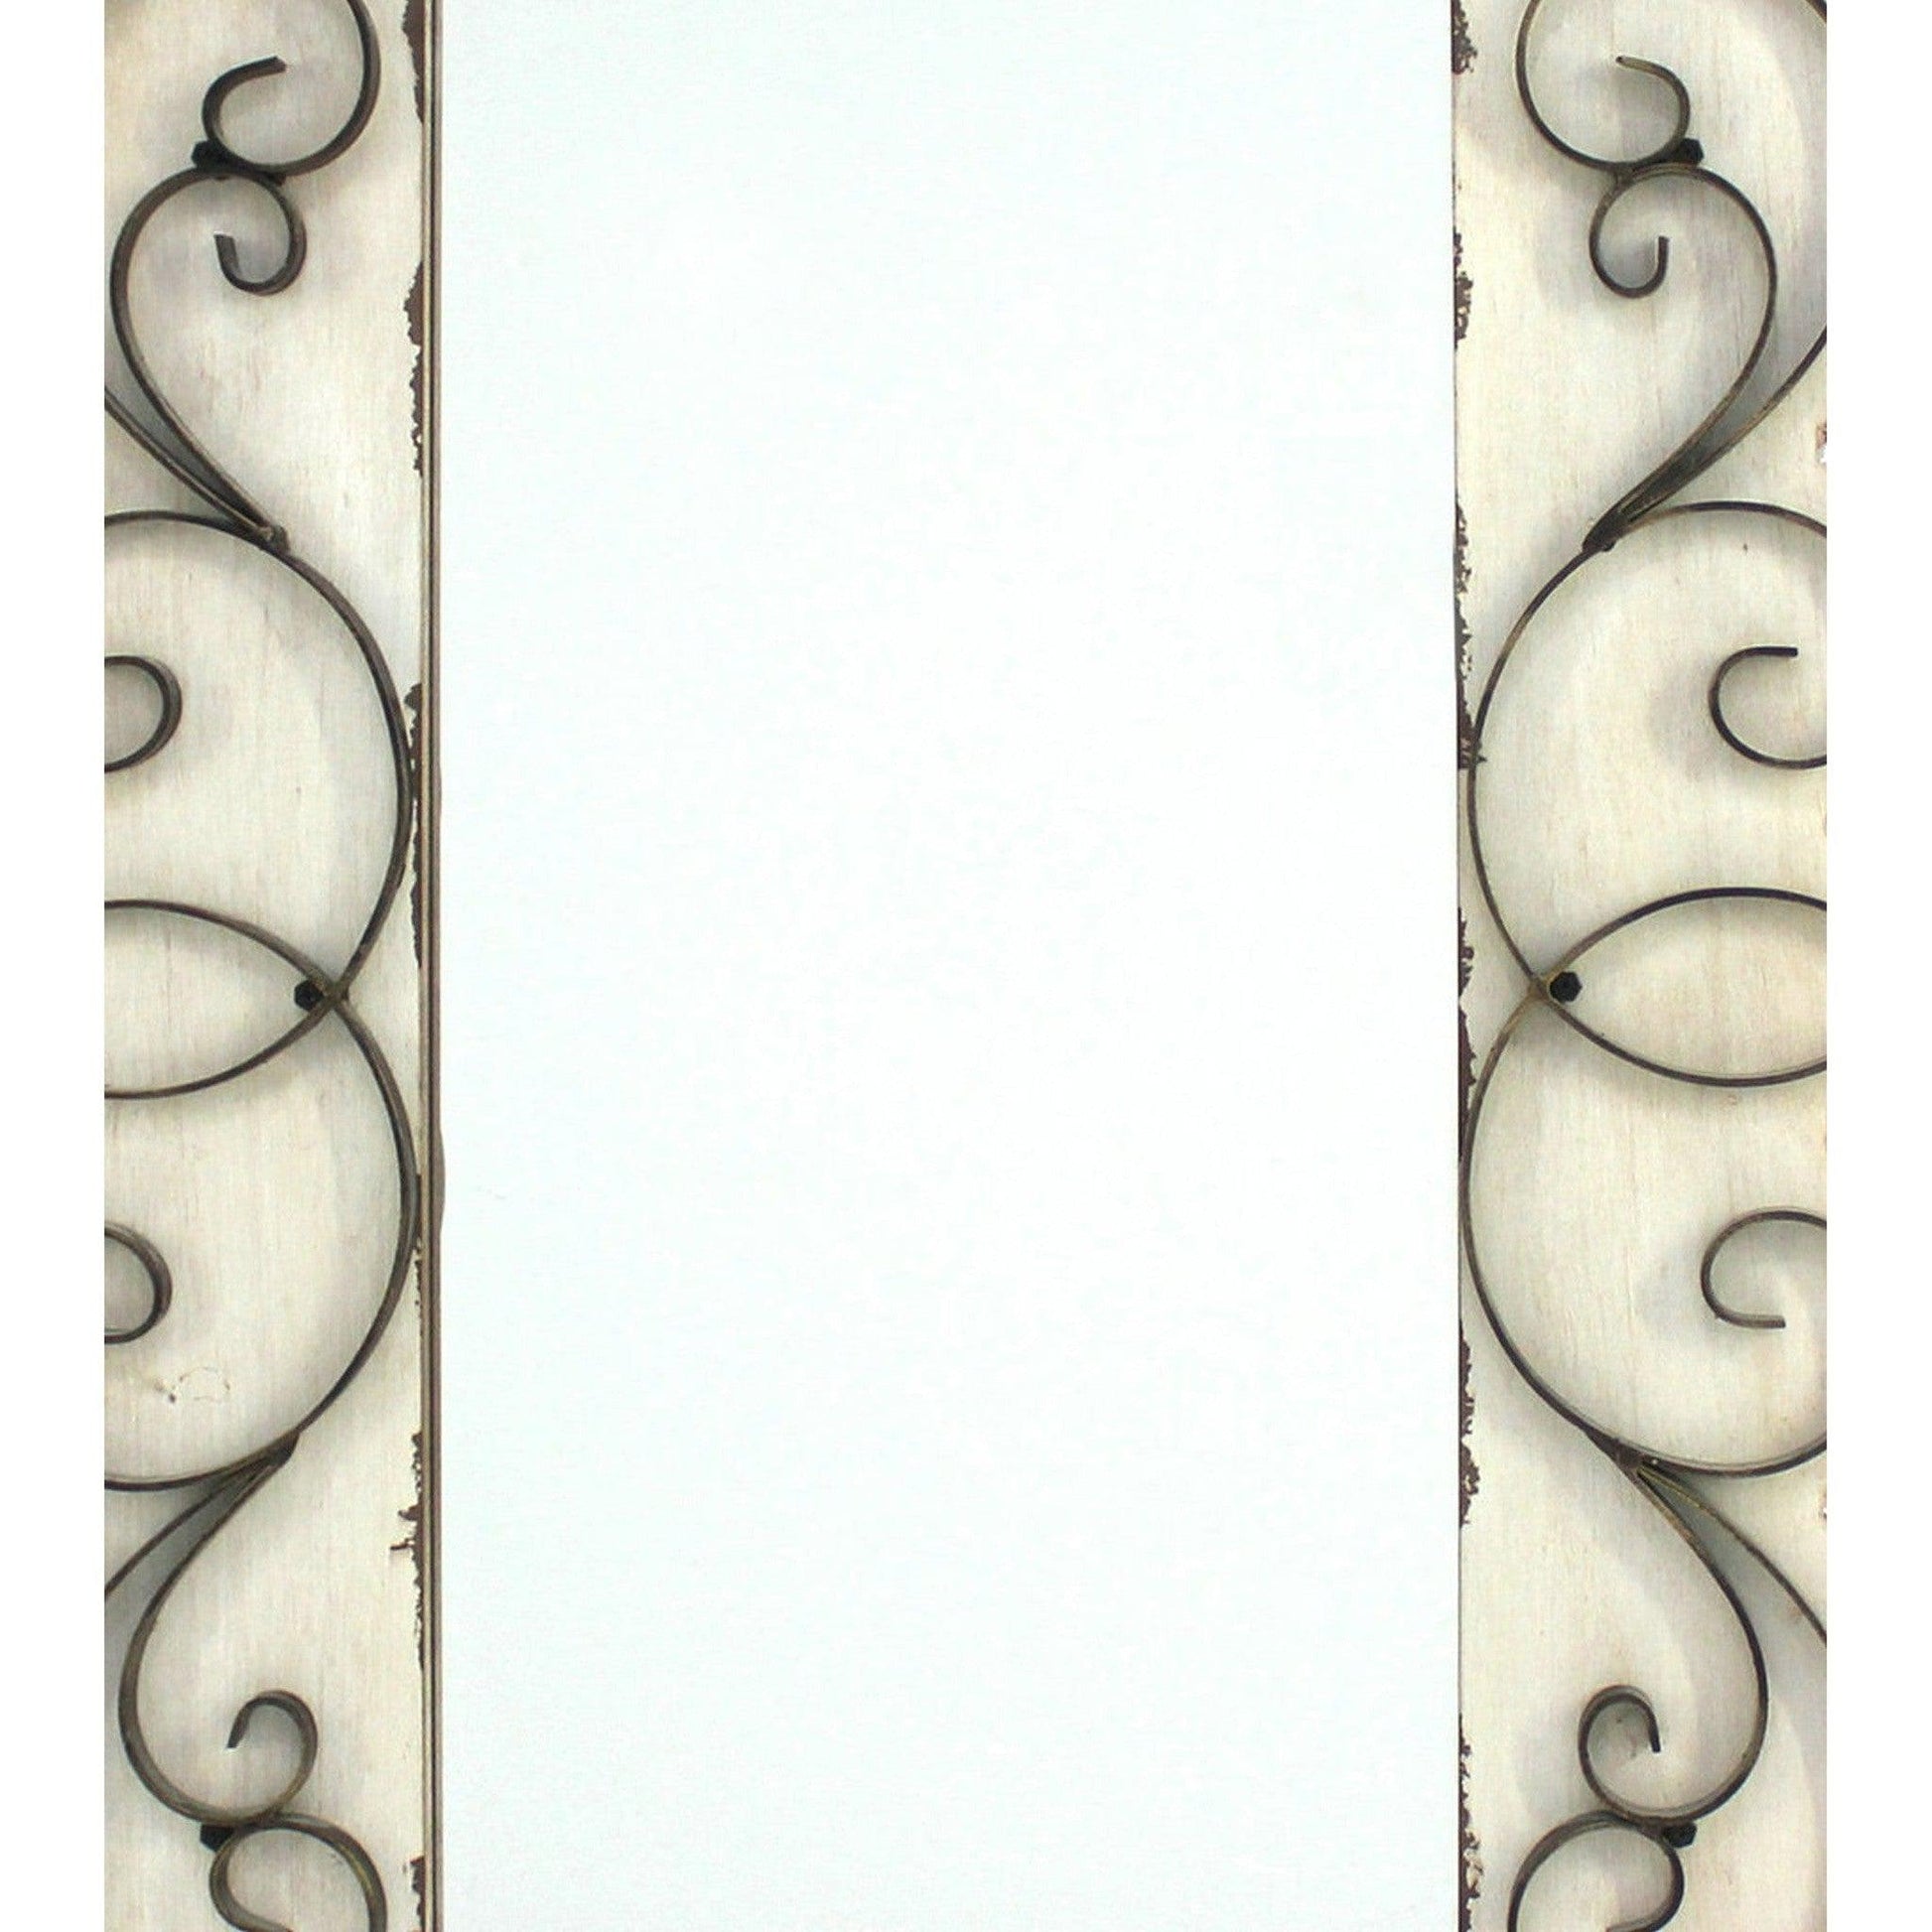 Benzara White Rectangular Wall Mirror With Wooden Frame and Metal Scrolled Edges